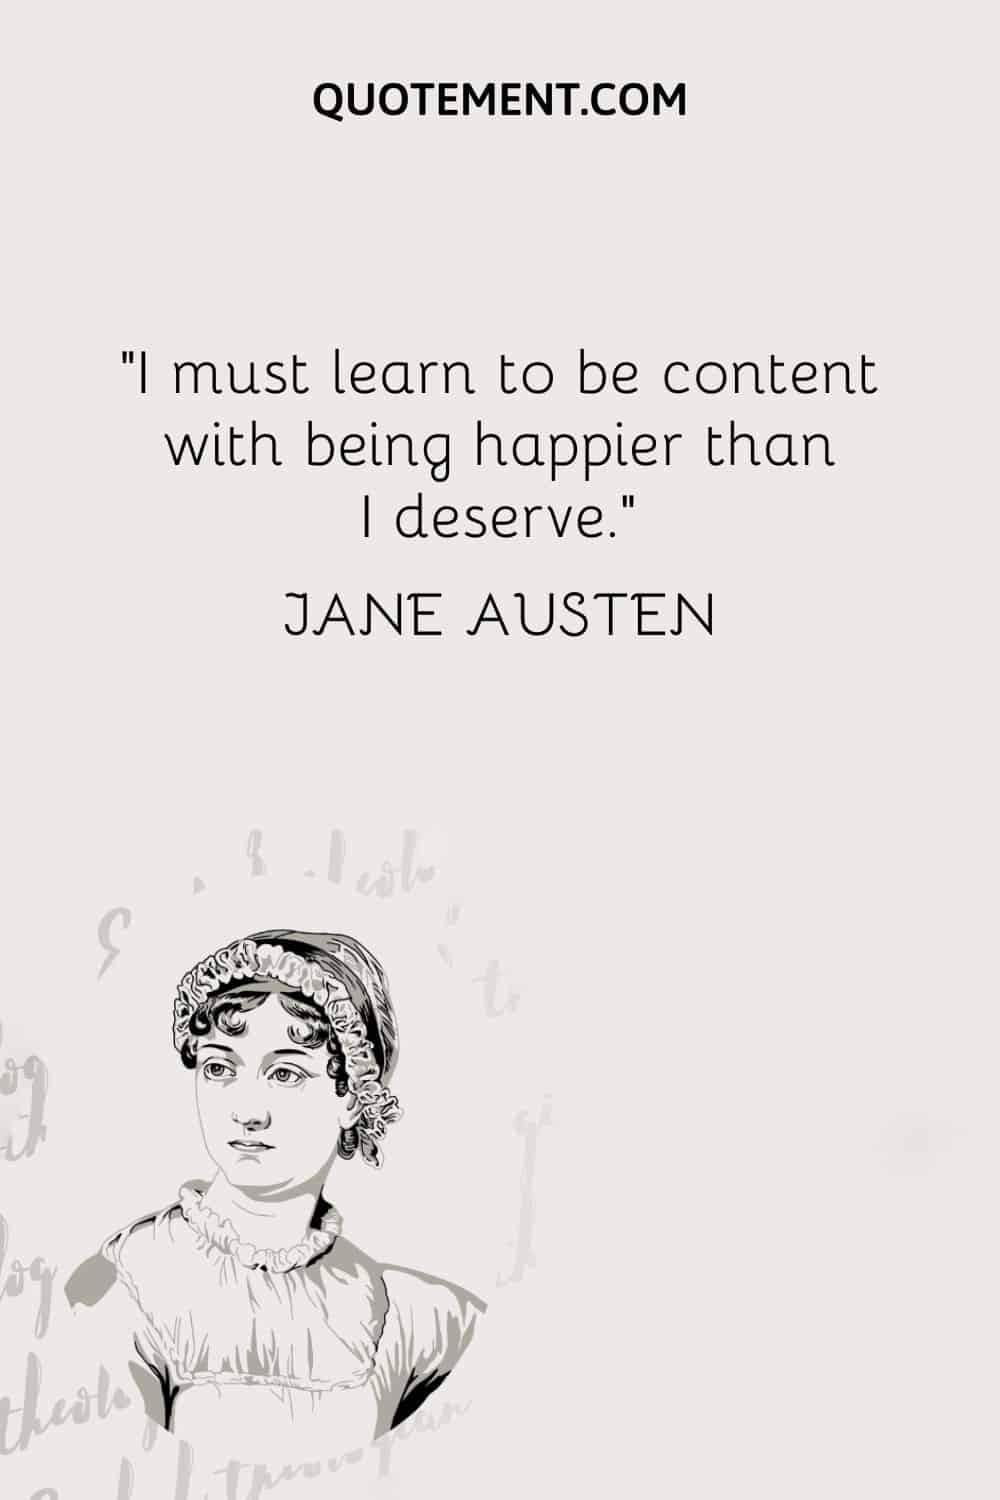 I must learn to be content with being happier than I deserve. — Jane Austen